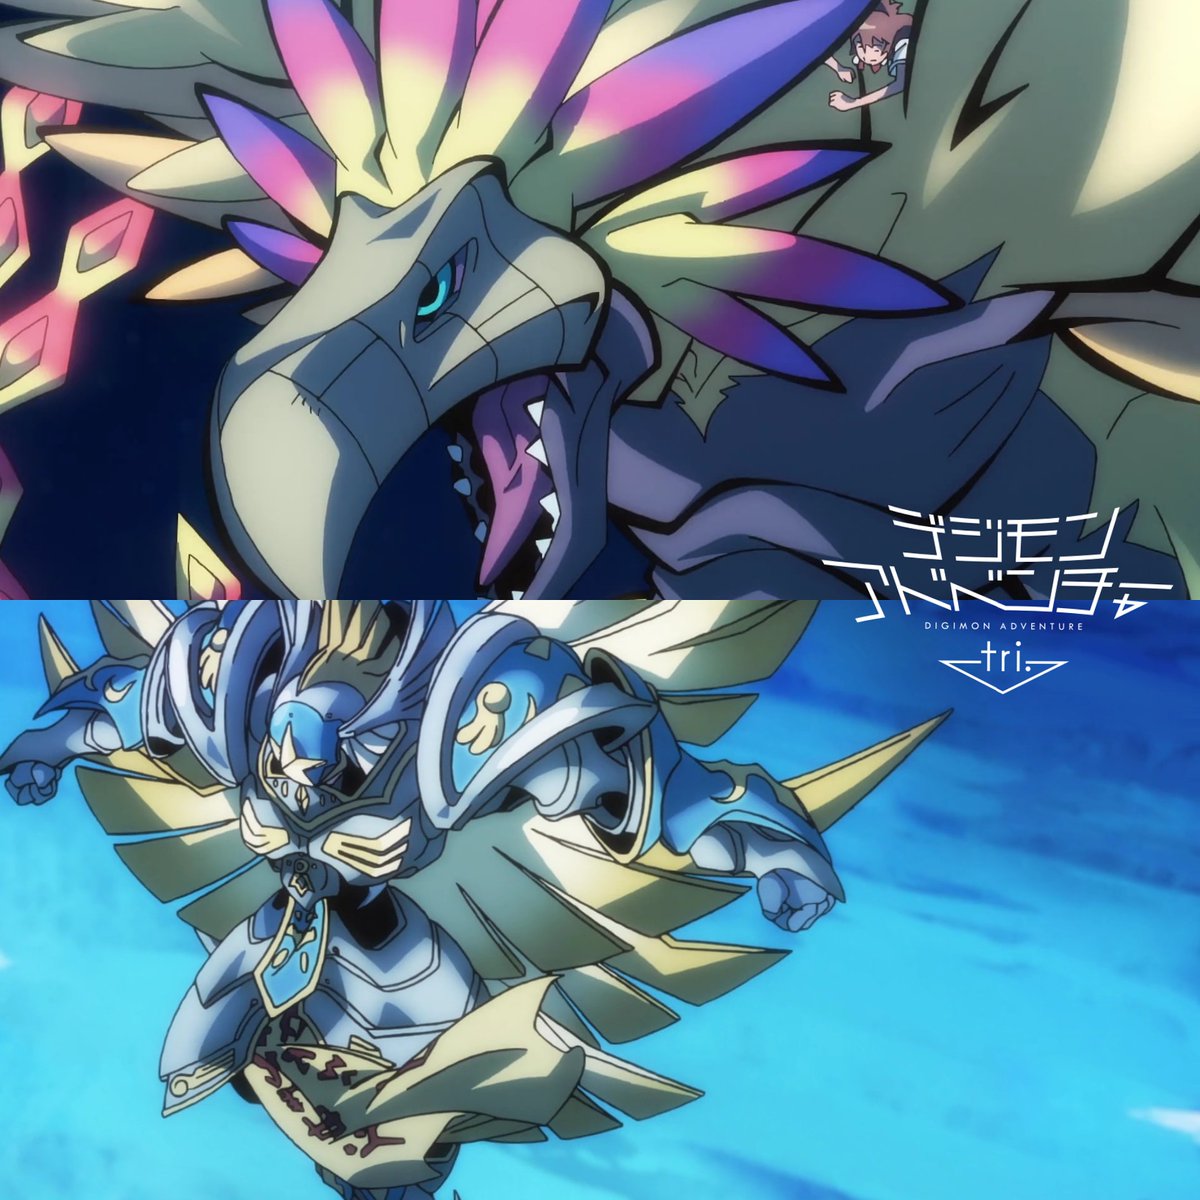 Seraphi COMMISSIONS OPEN on X: ▪︎ Digimon Adventure Tri. 6 (Bokura no  mirai) ▪︎ Digimon Adventure Tri. 5 (Kyosei) ▪︎ Digimon Adventure Tri. 4  (Soushitsu) ▪︎ Digimon Adventure Tri. 3 (Kokuhaku) #digimon #digimontri   / X